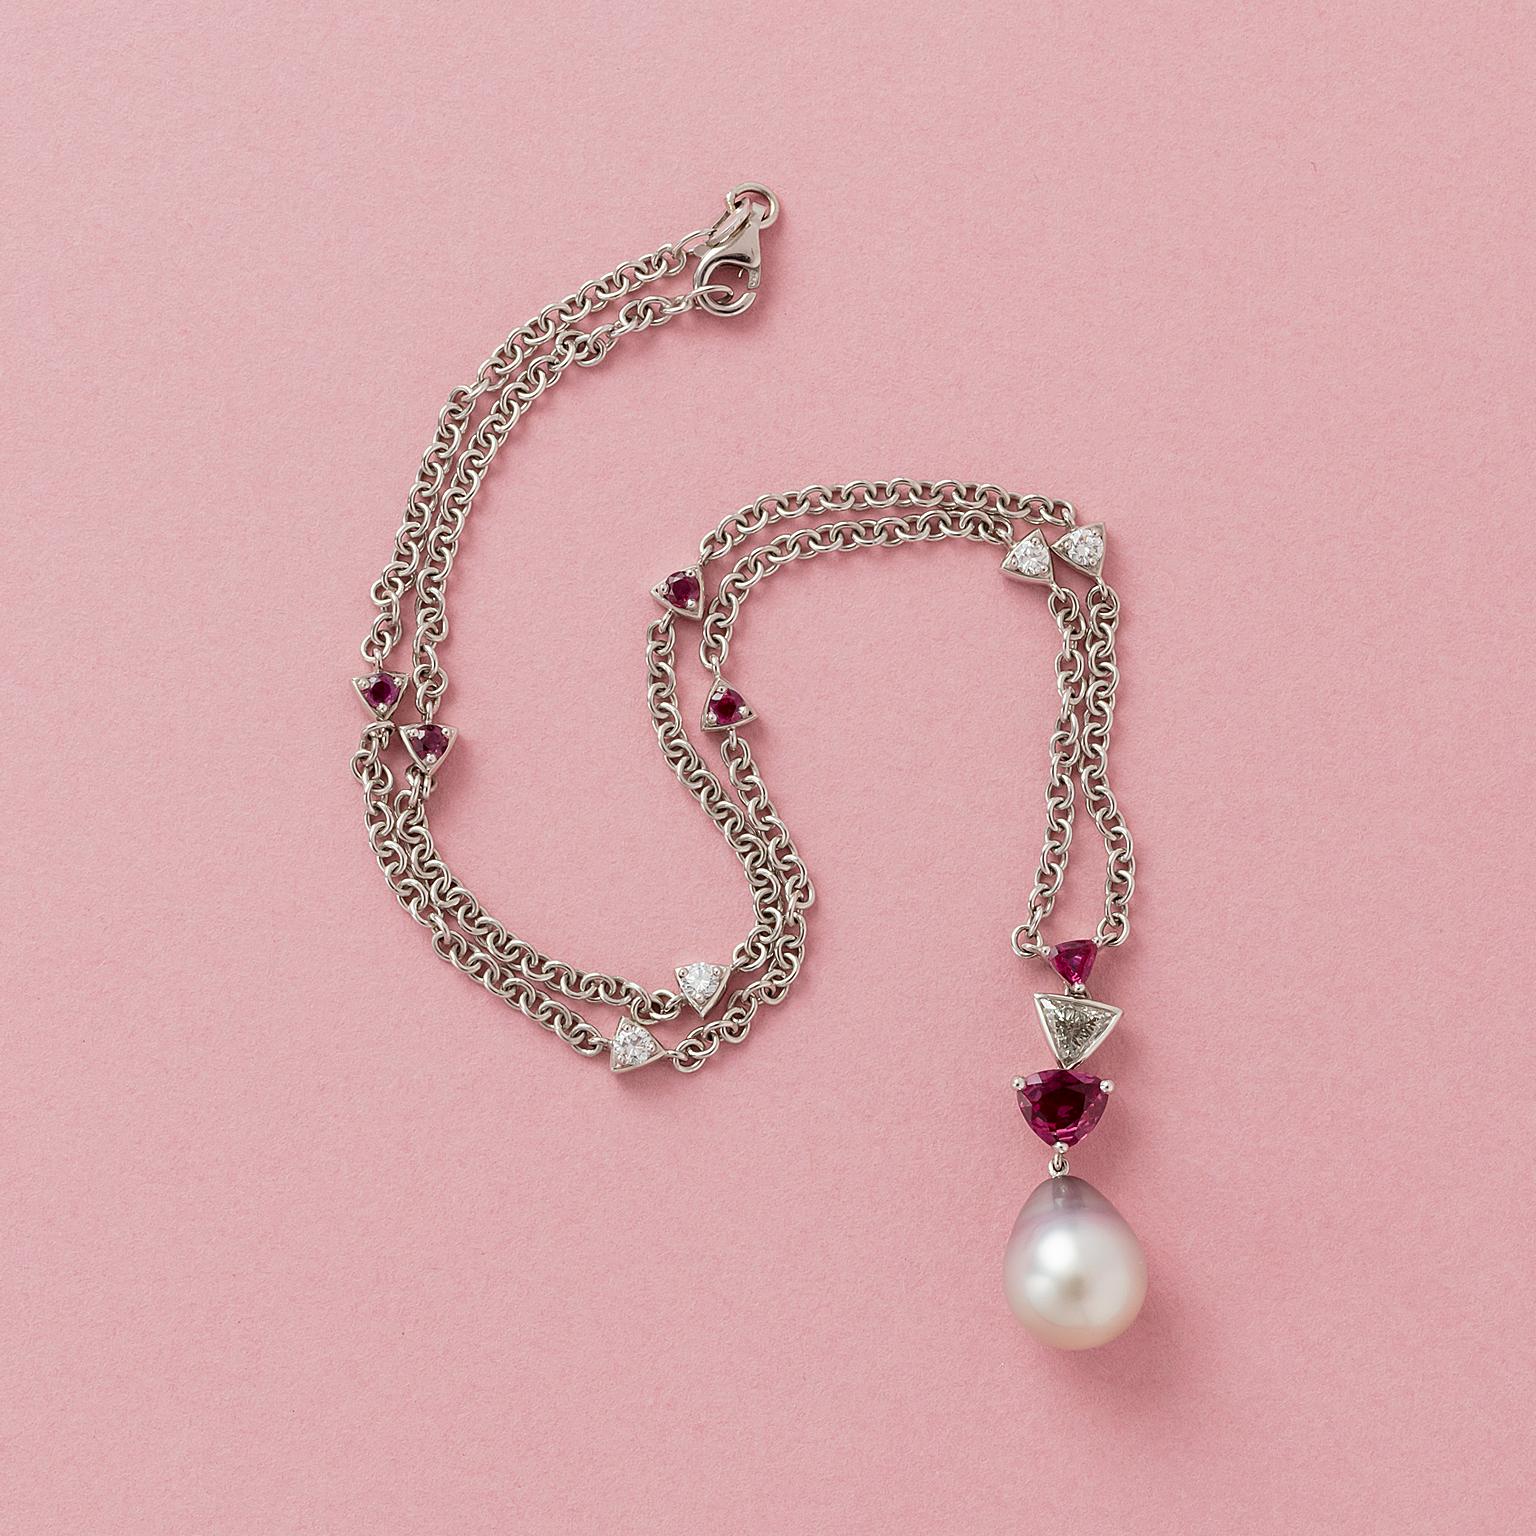 Modern White Gold Necklace with Ruby, Diamond and Pearl